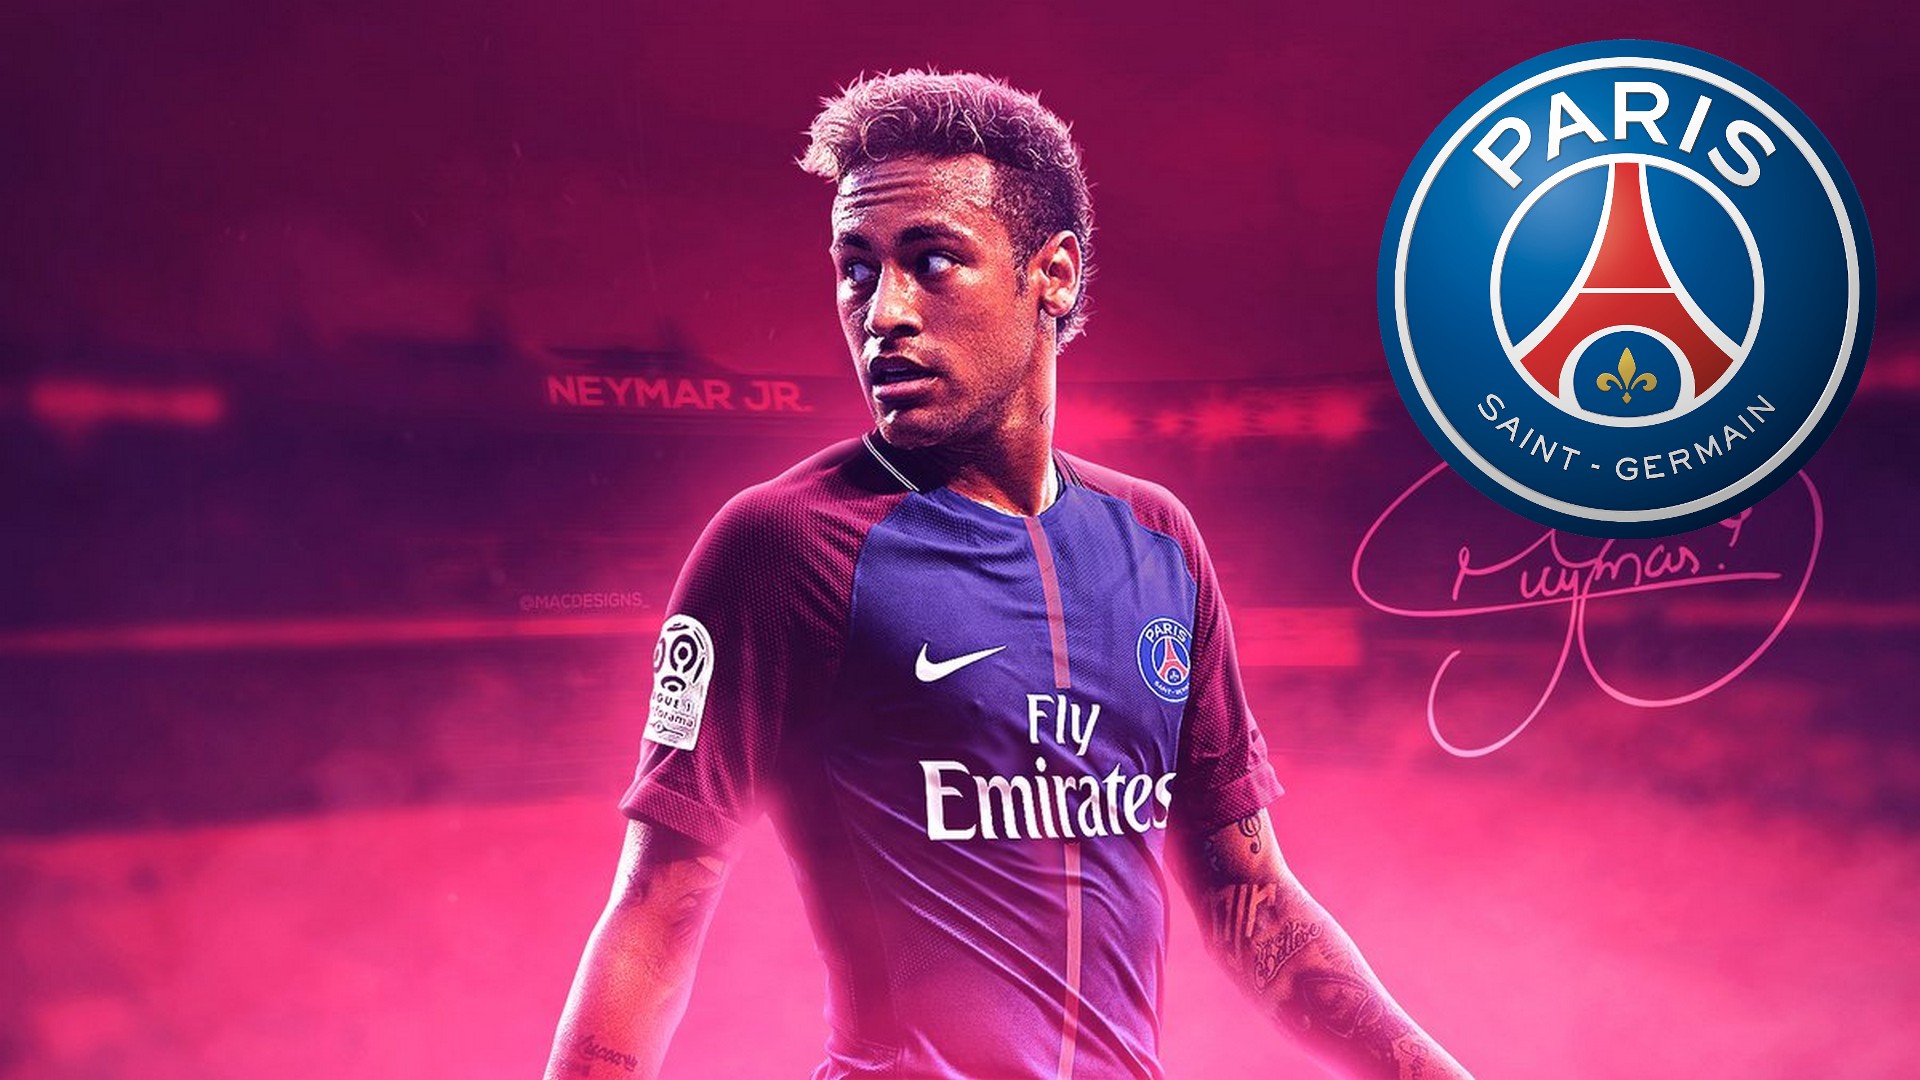 Neymar PSG Wallpaper With Resolution 1920X1080 pixel. You can make this wallpaper for your Mac or Windows Desktop Background, iPhone, Android or Tablet and another Smartphone device for free